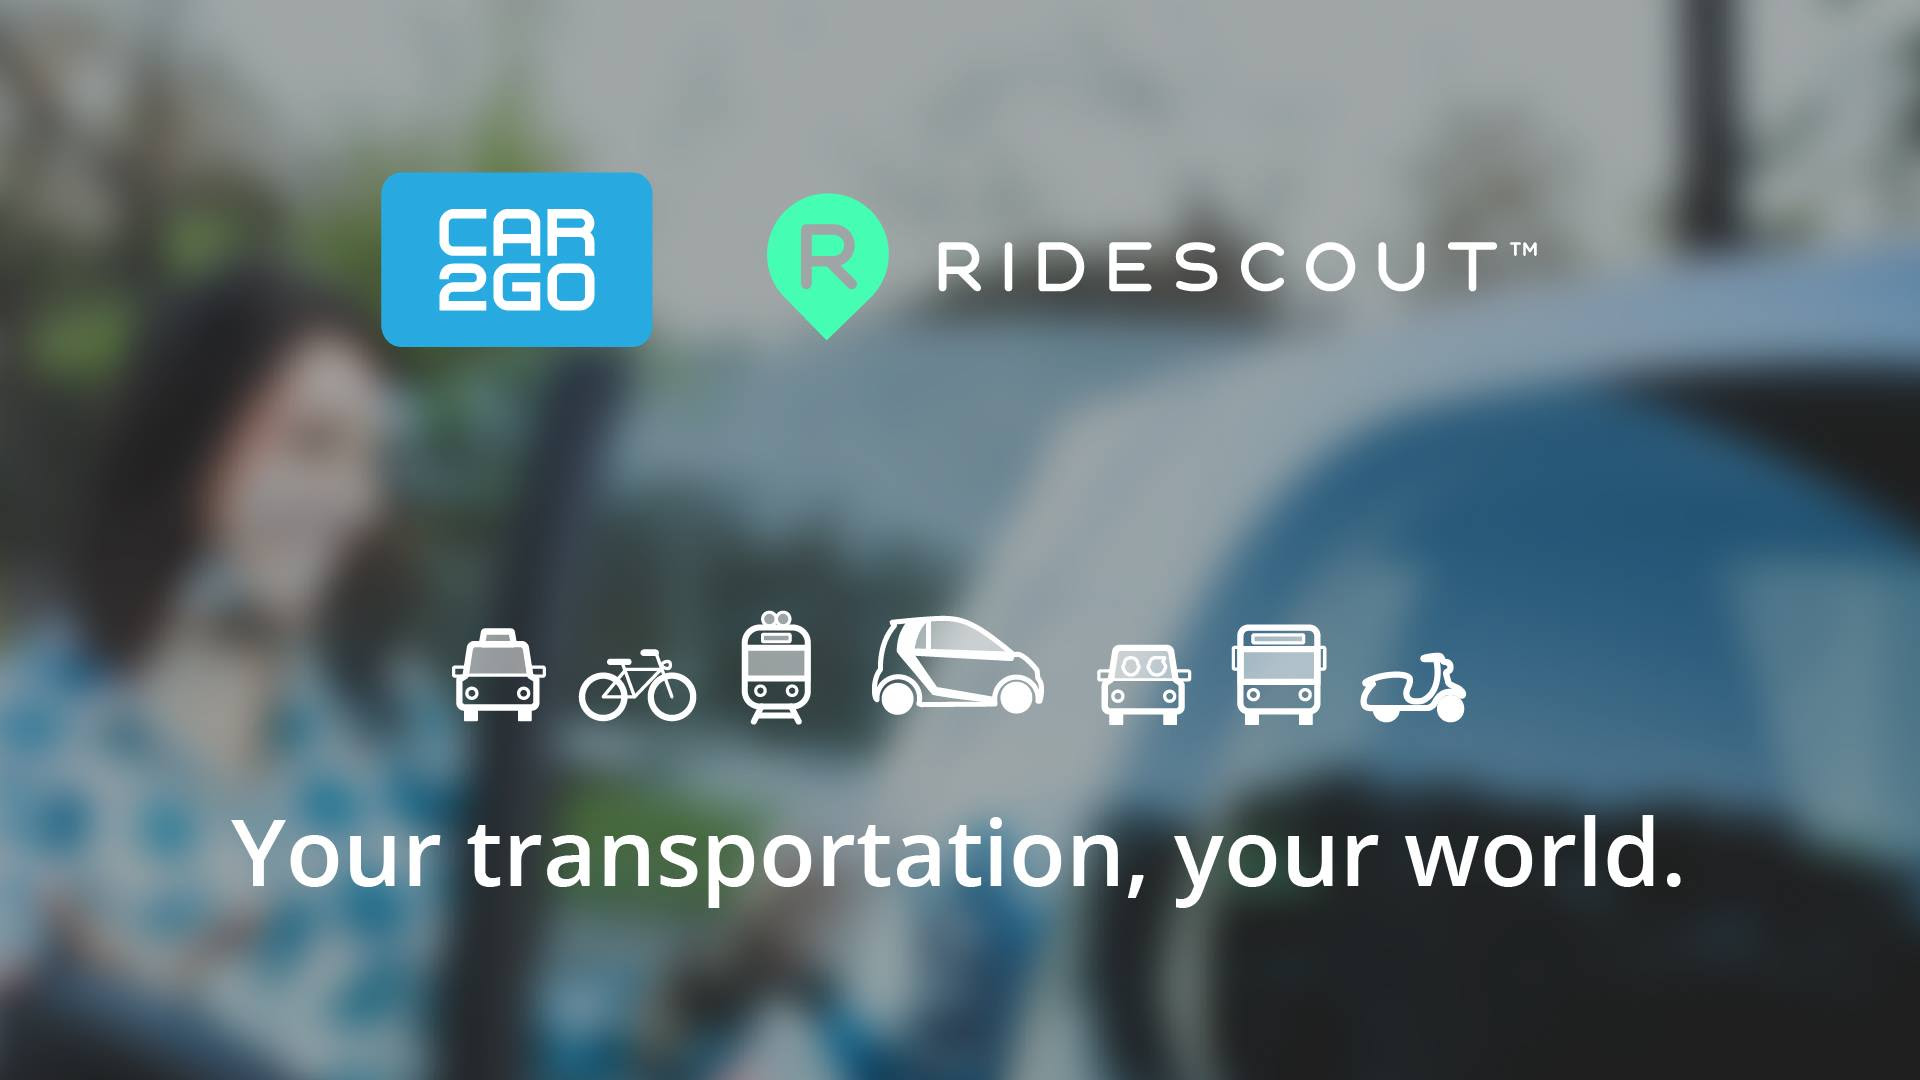 RideScout was just acquired by car2go.